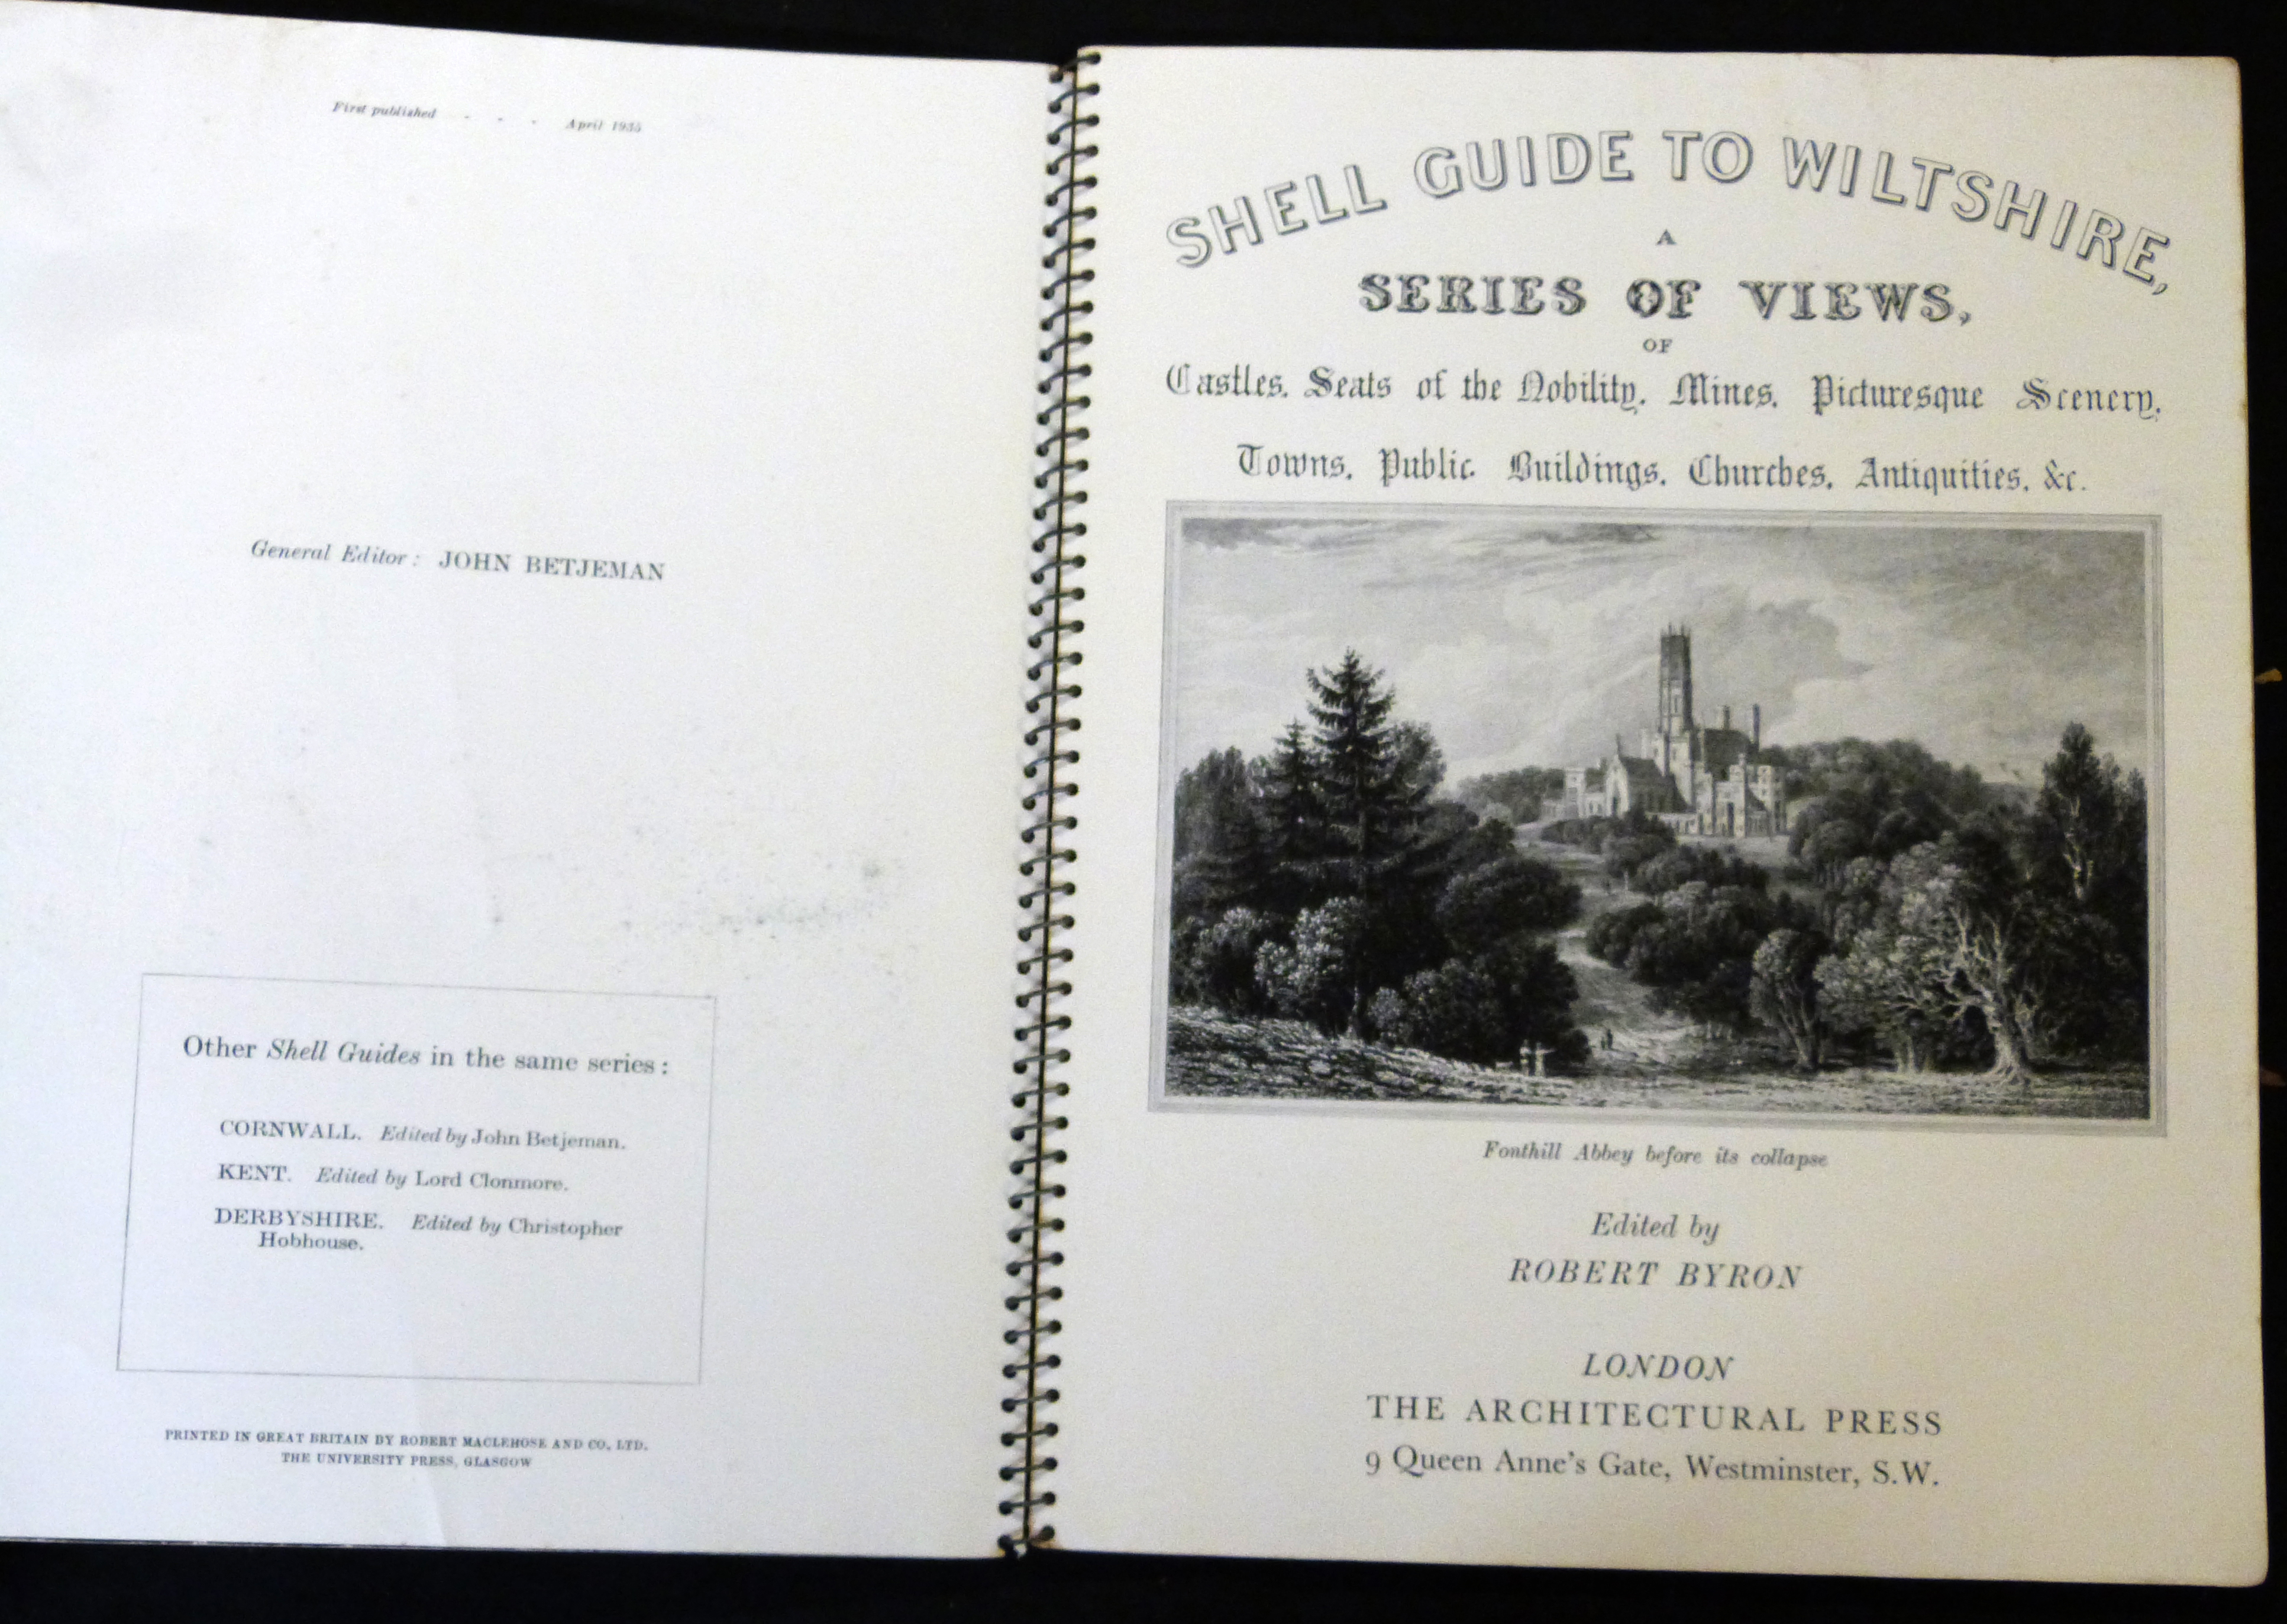 ROBERT BYRON (ED): SHELL GUIDE TO WILTSHIRE, London, Architectural Press, 1935, 1st edition, 4to, - Image 2 of 3